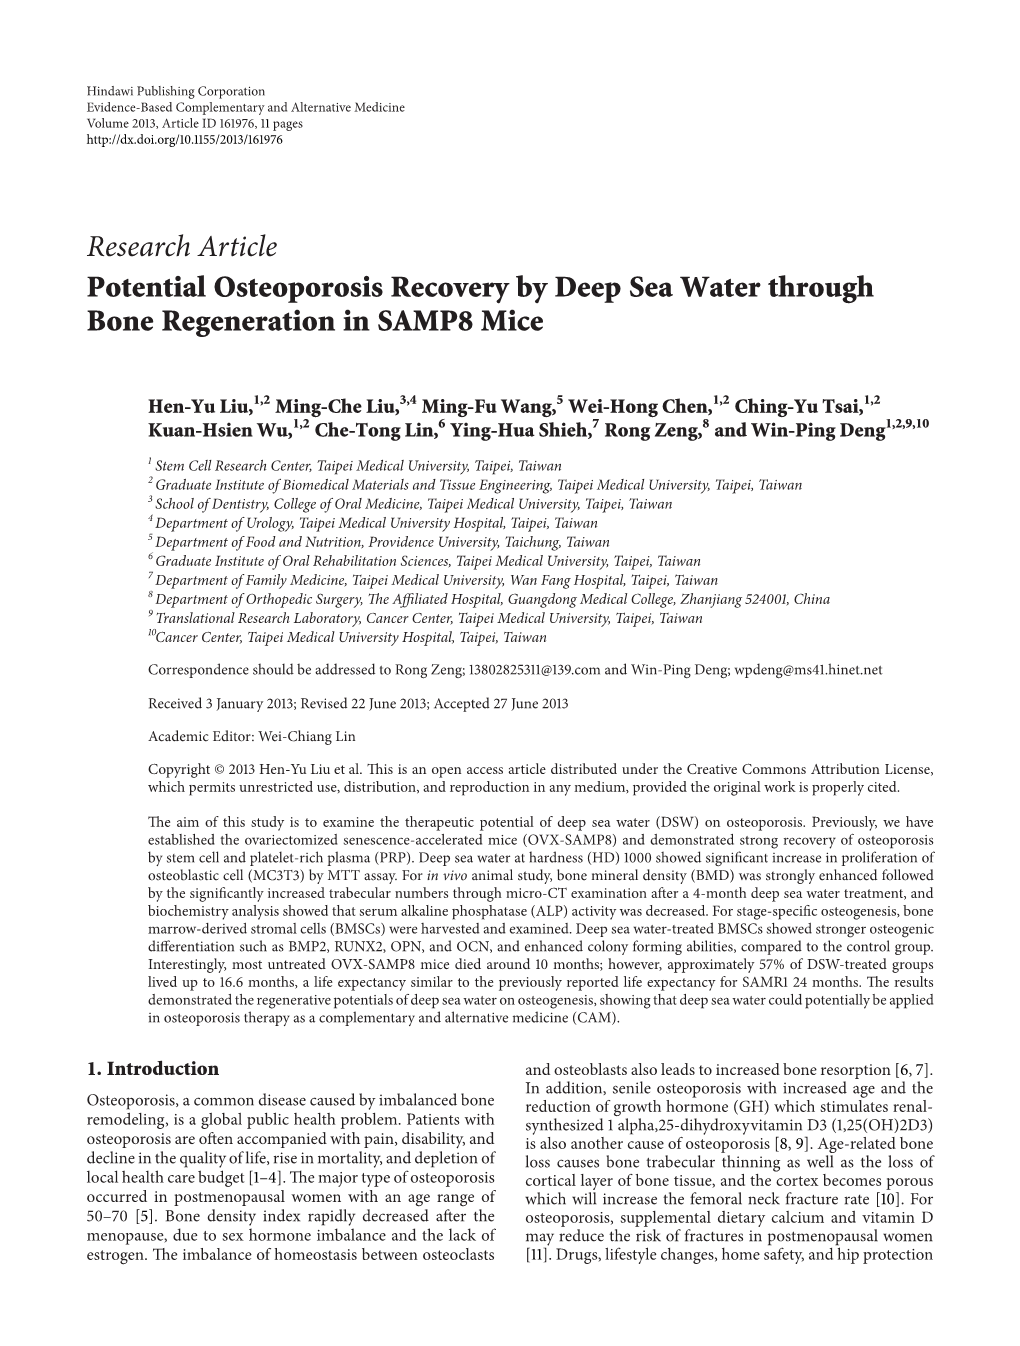 Potential Osteoporosis Recovery by Deep Sea Water Through Bone Regeneration in SAMP8 Mice